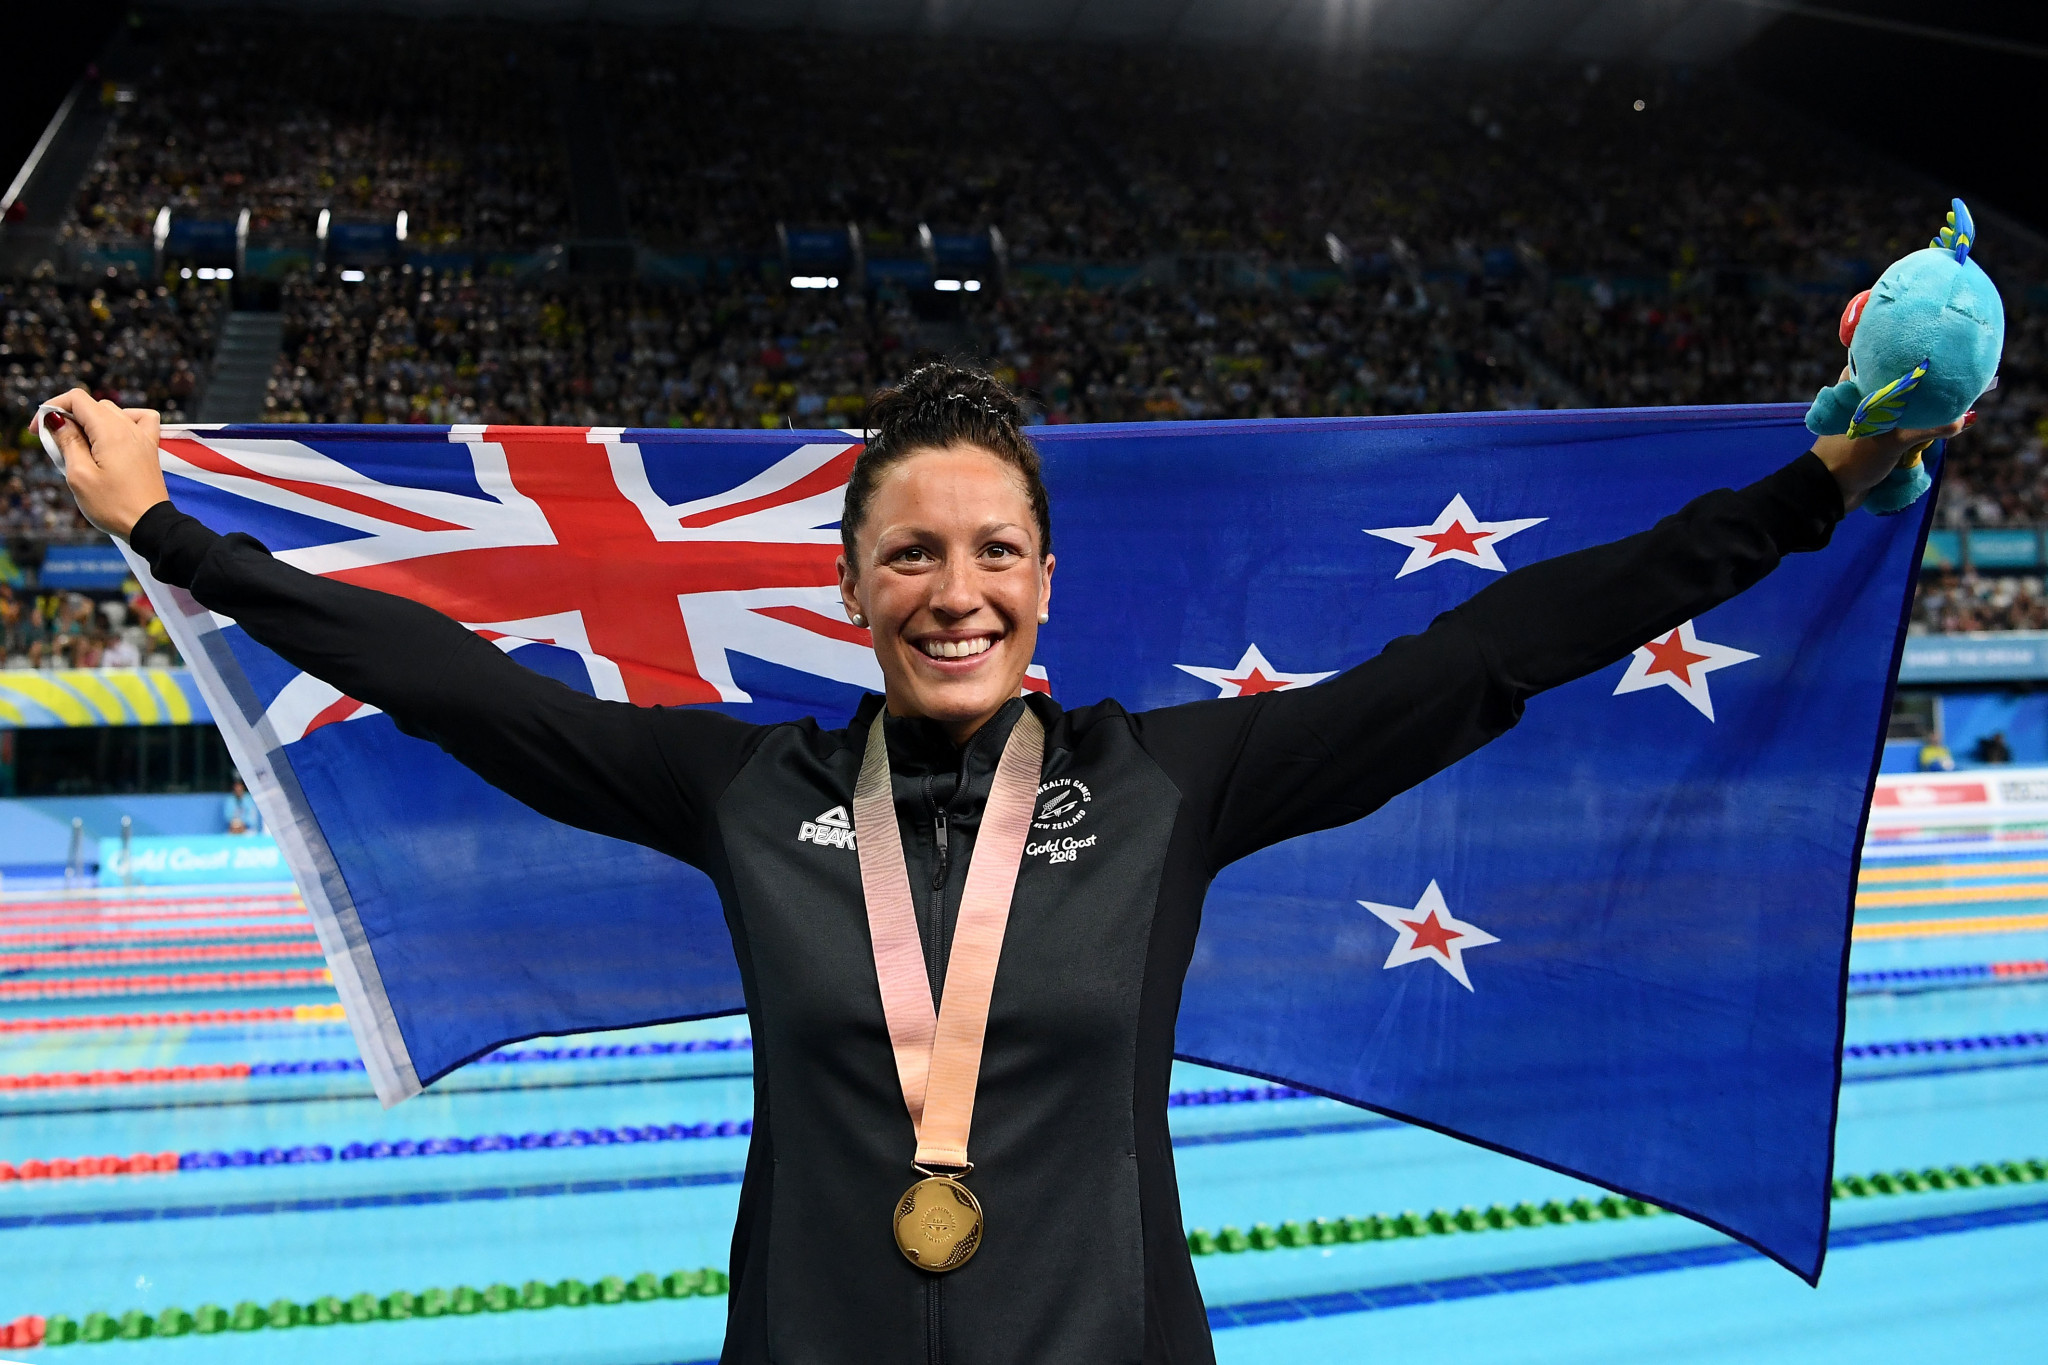 Pascoe headlines New Zealand team for World Para Swimming Championships in London